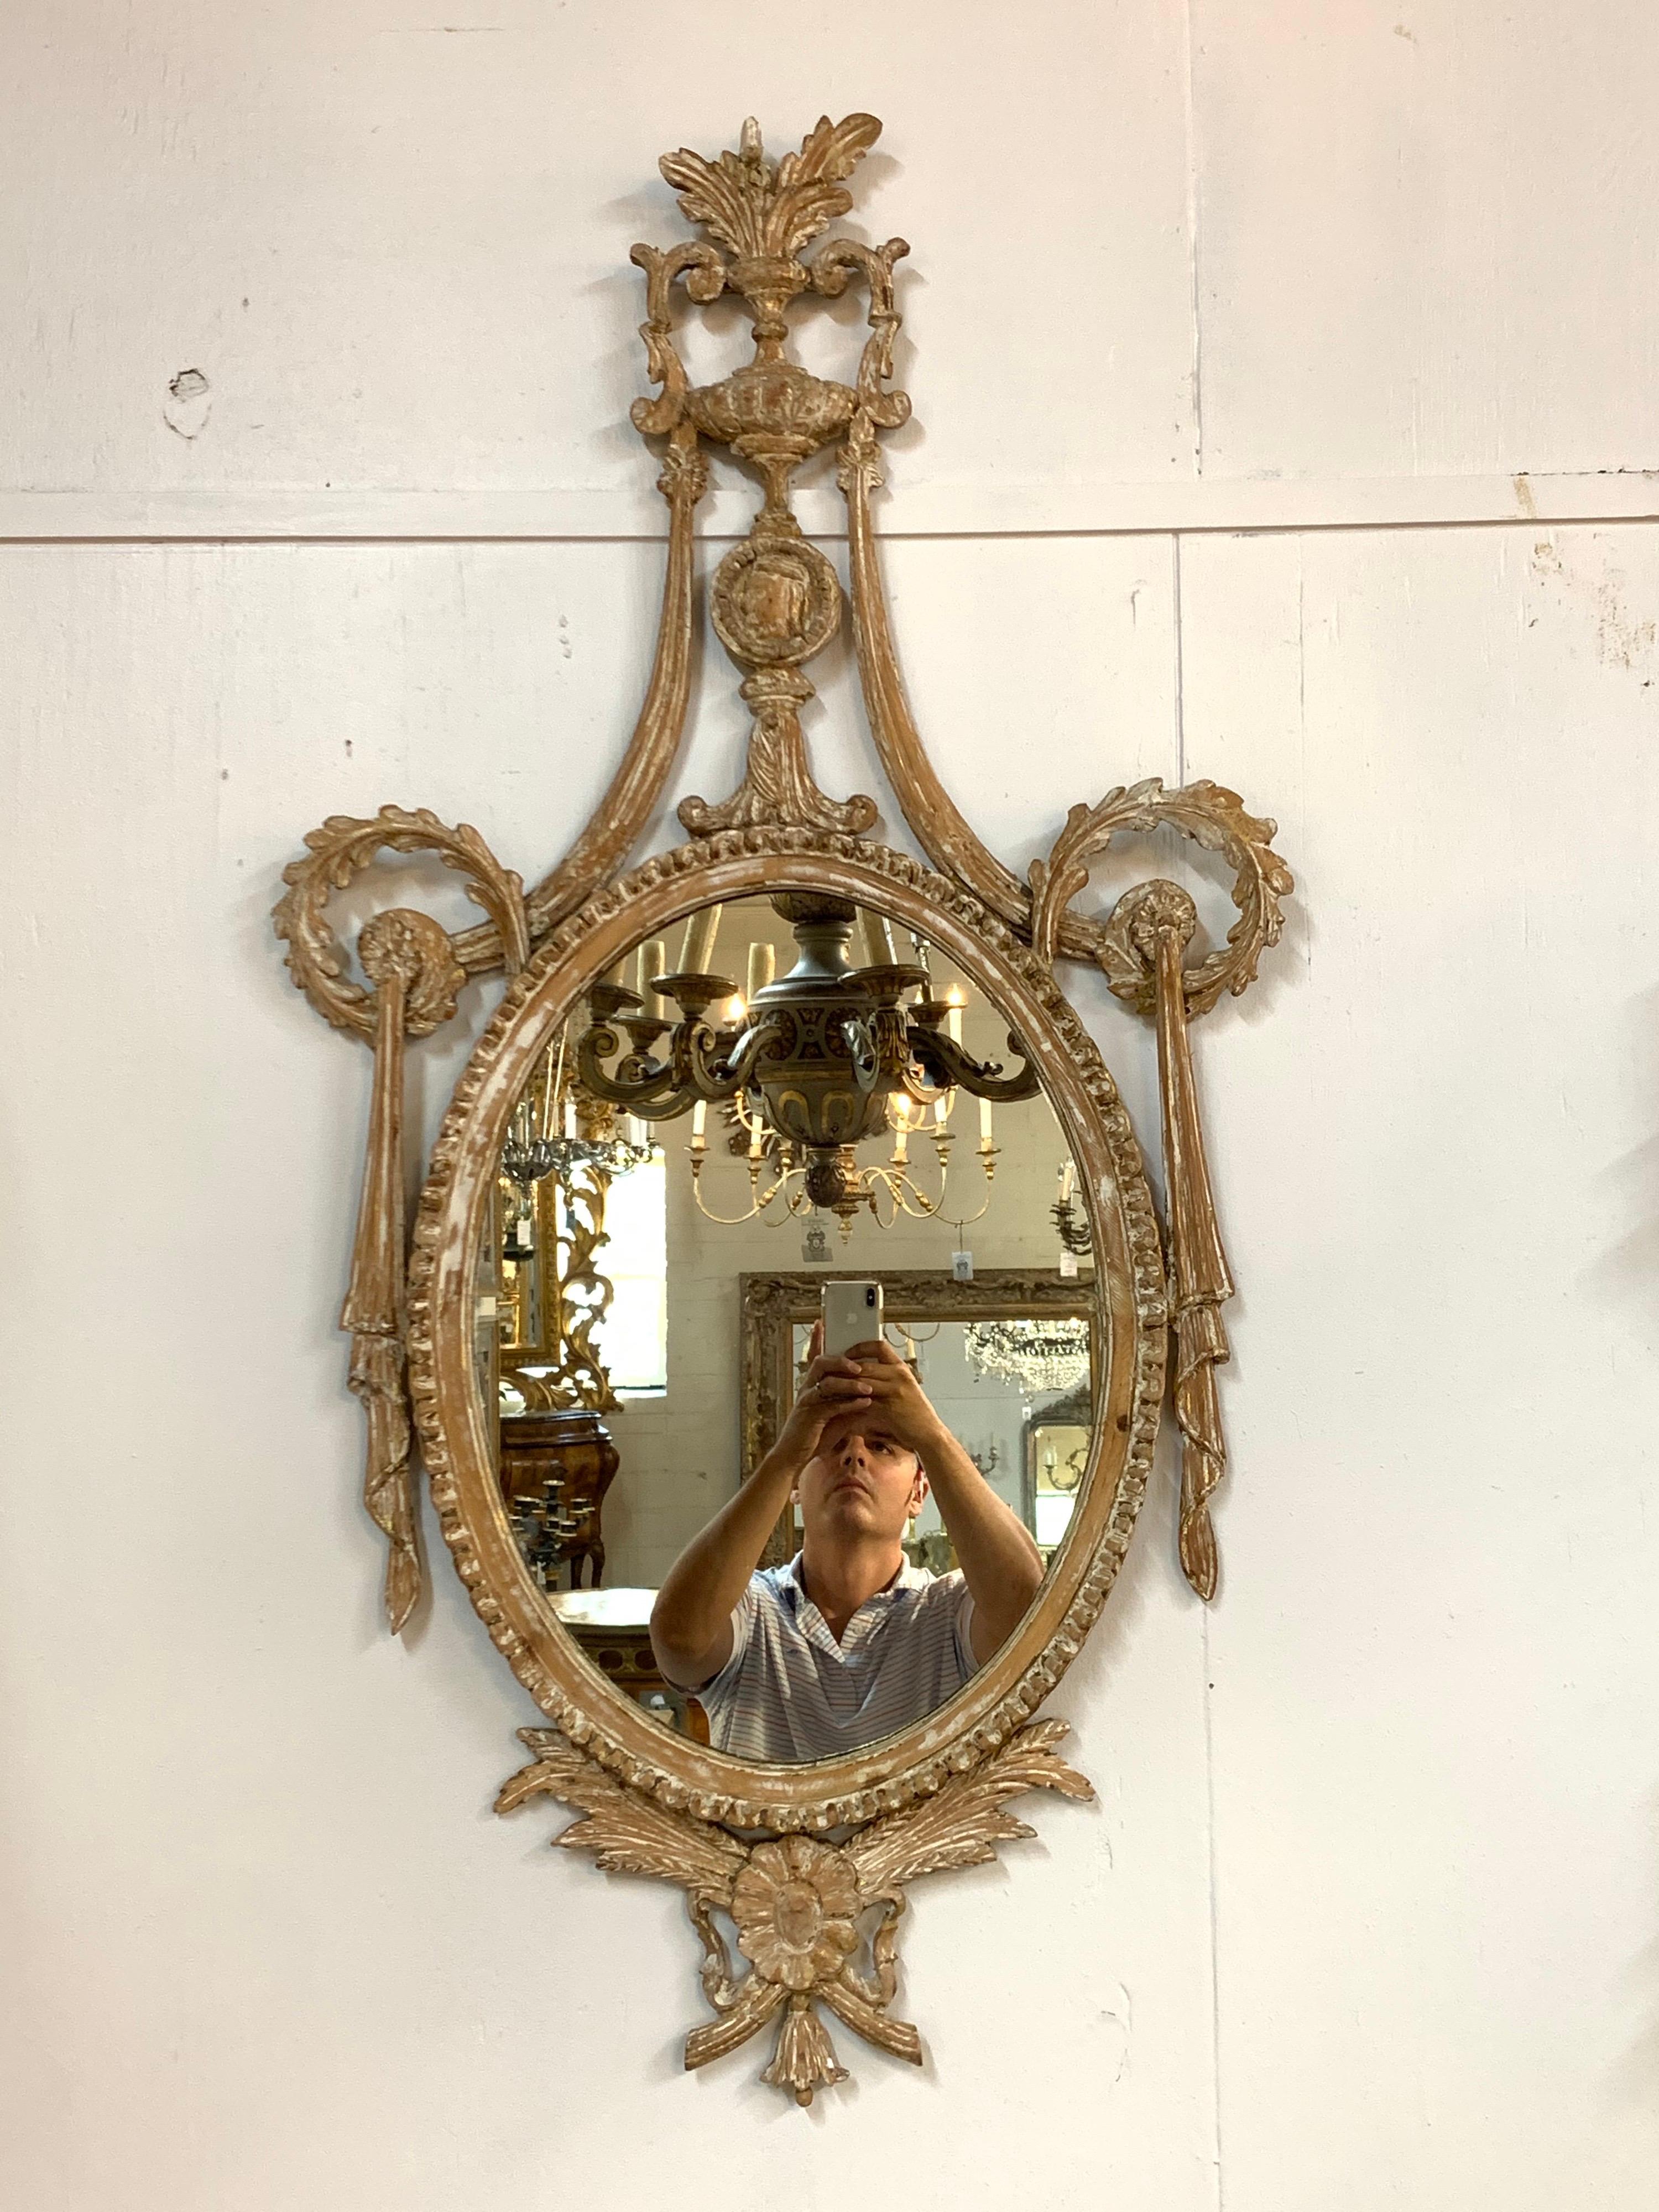 Fabulous pair of 19th century Italian neoclassical carved and white washed mirrors. Carvings including floral images, an urn and a bow. Makes a gorgeous accessory for a fine home!